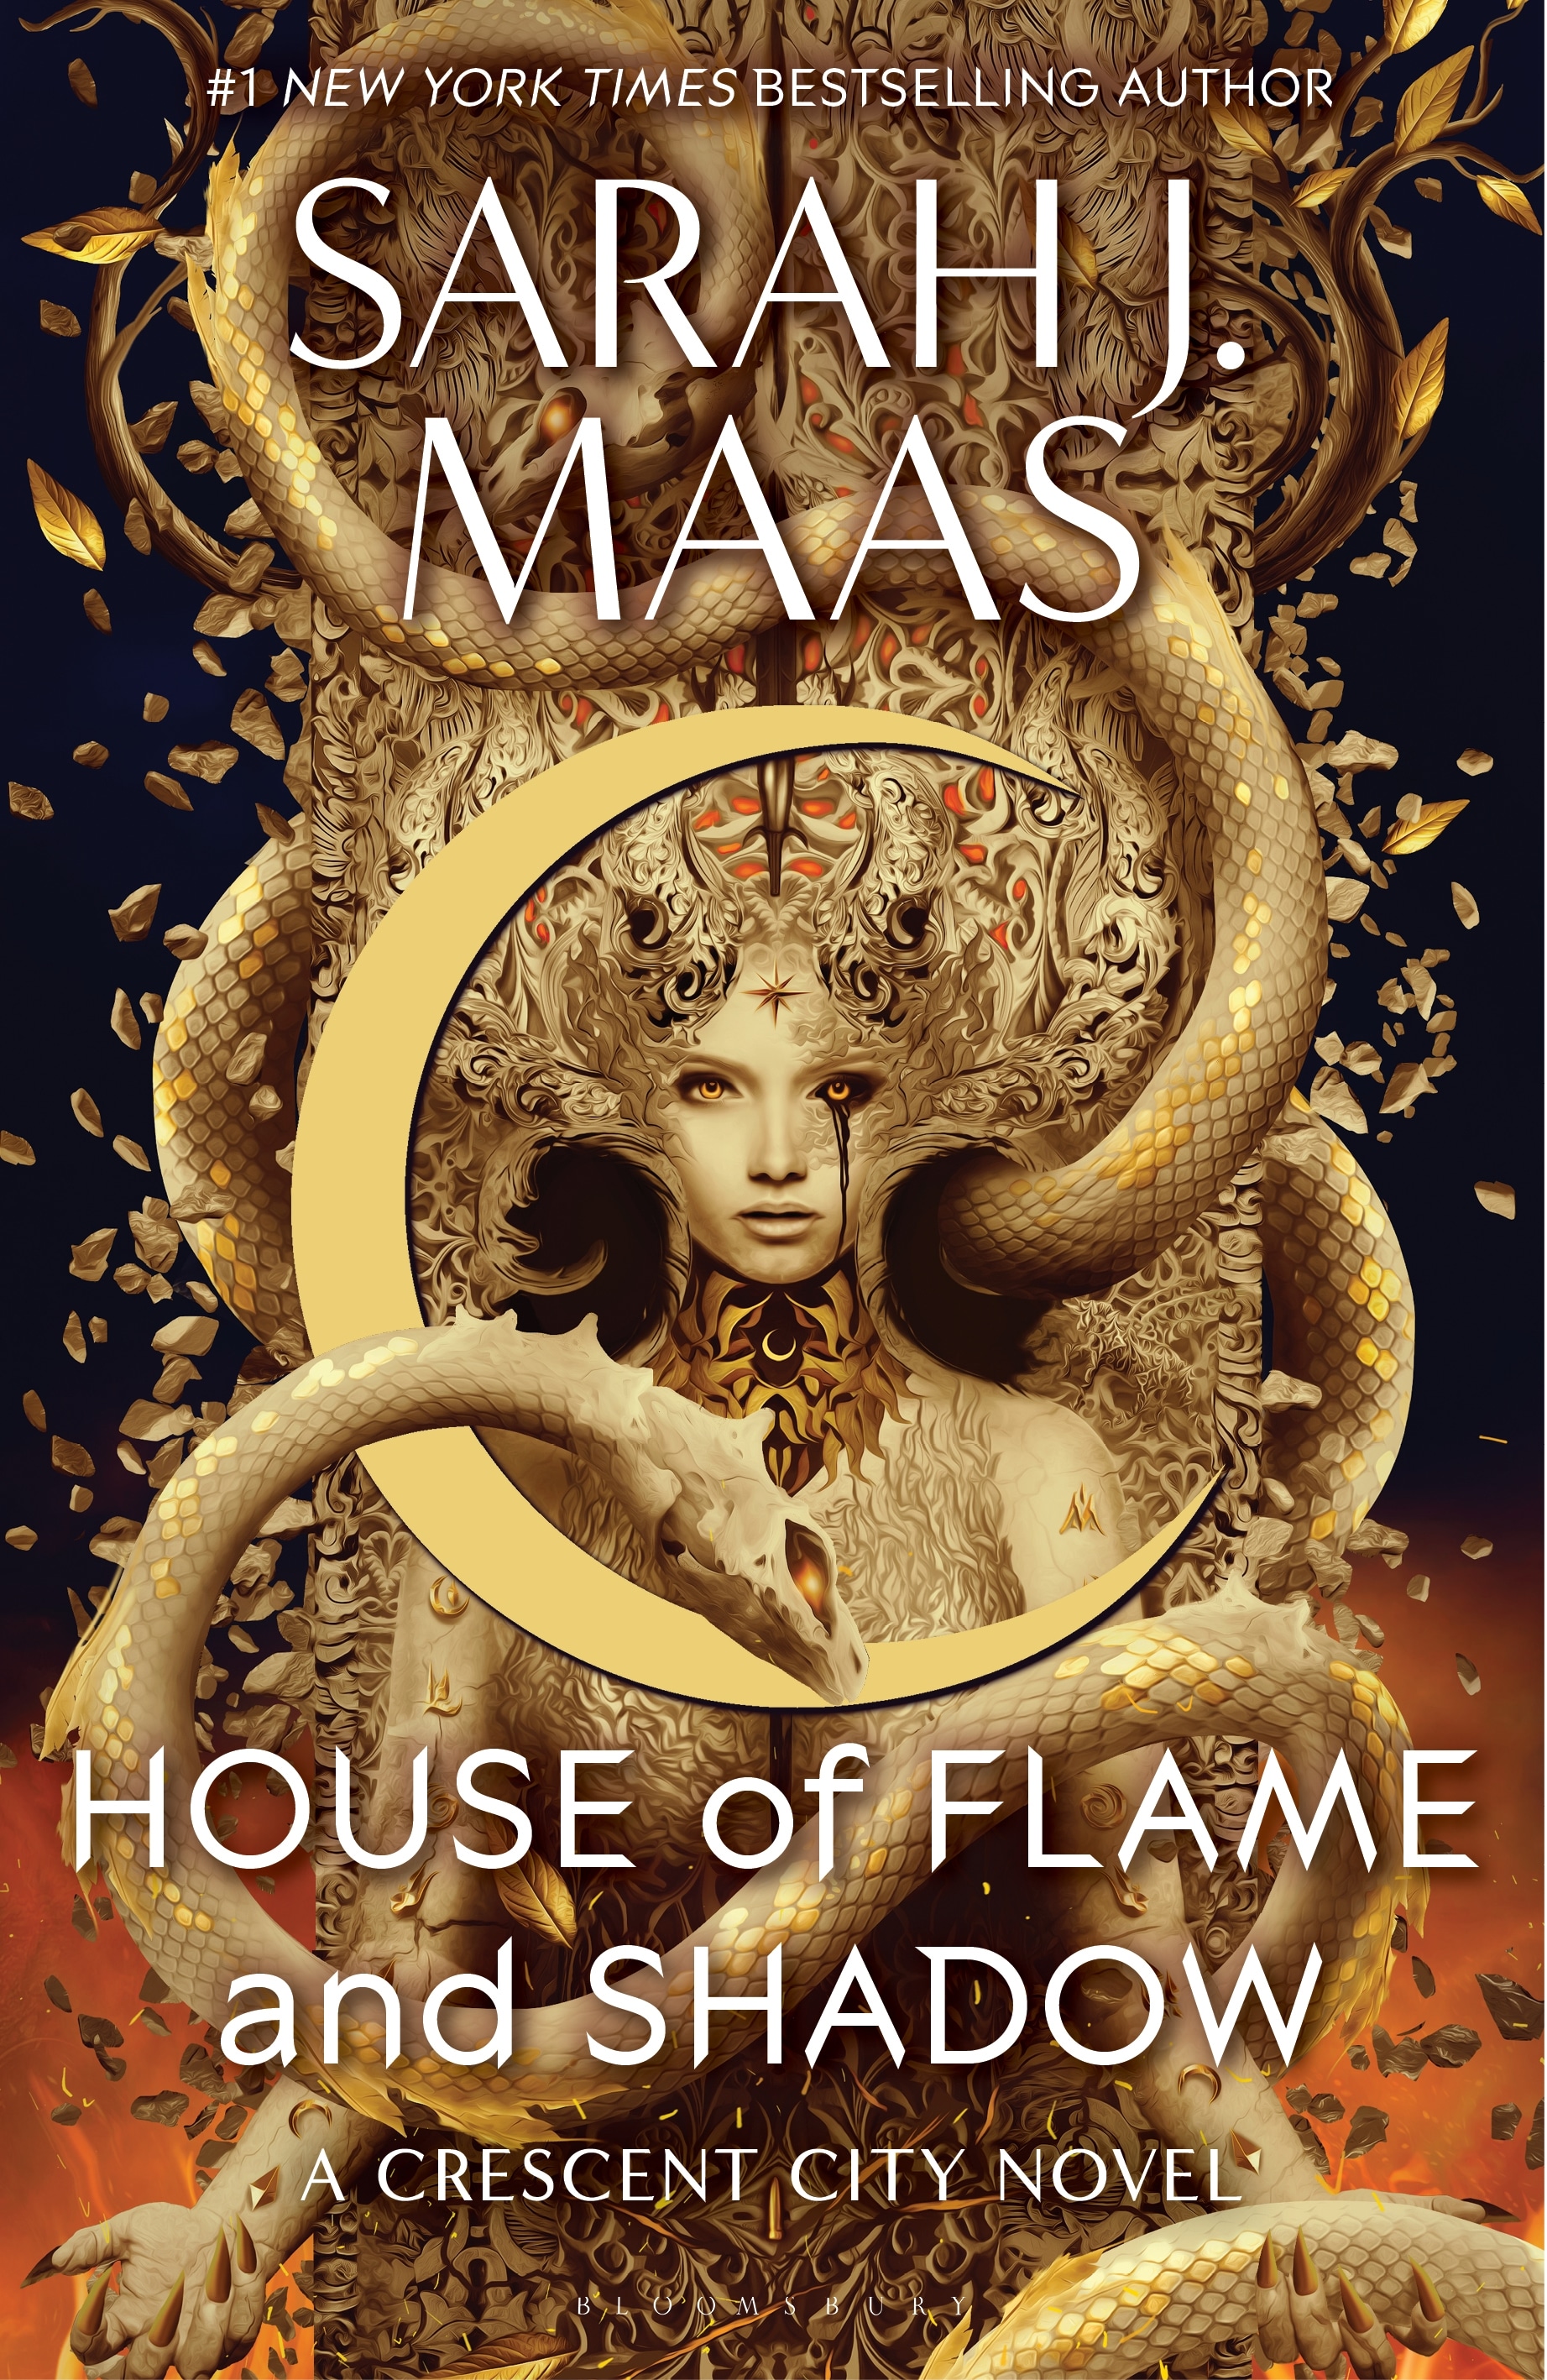 Book “House of Flame and Shadow” by Sarah J. Maas — January 30, 2024